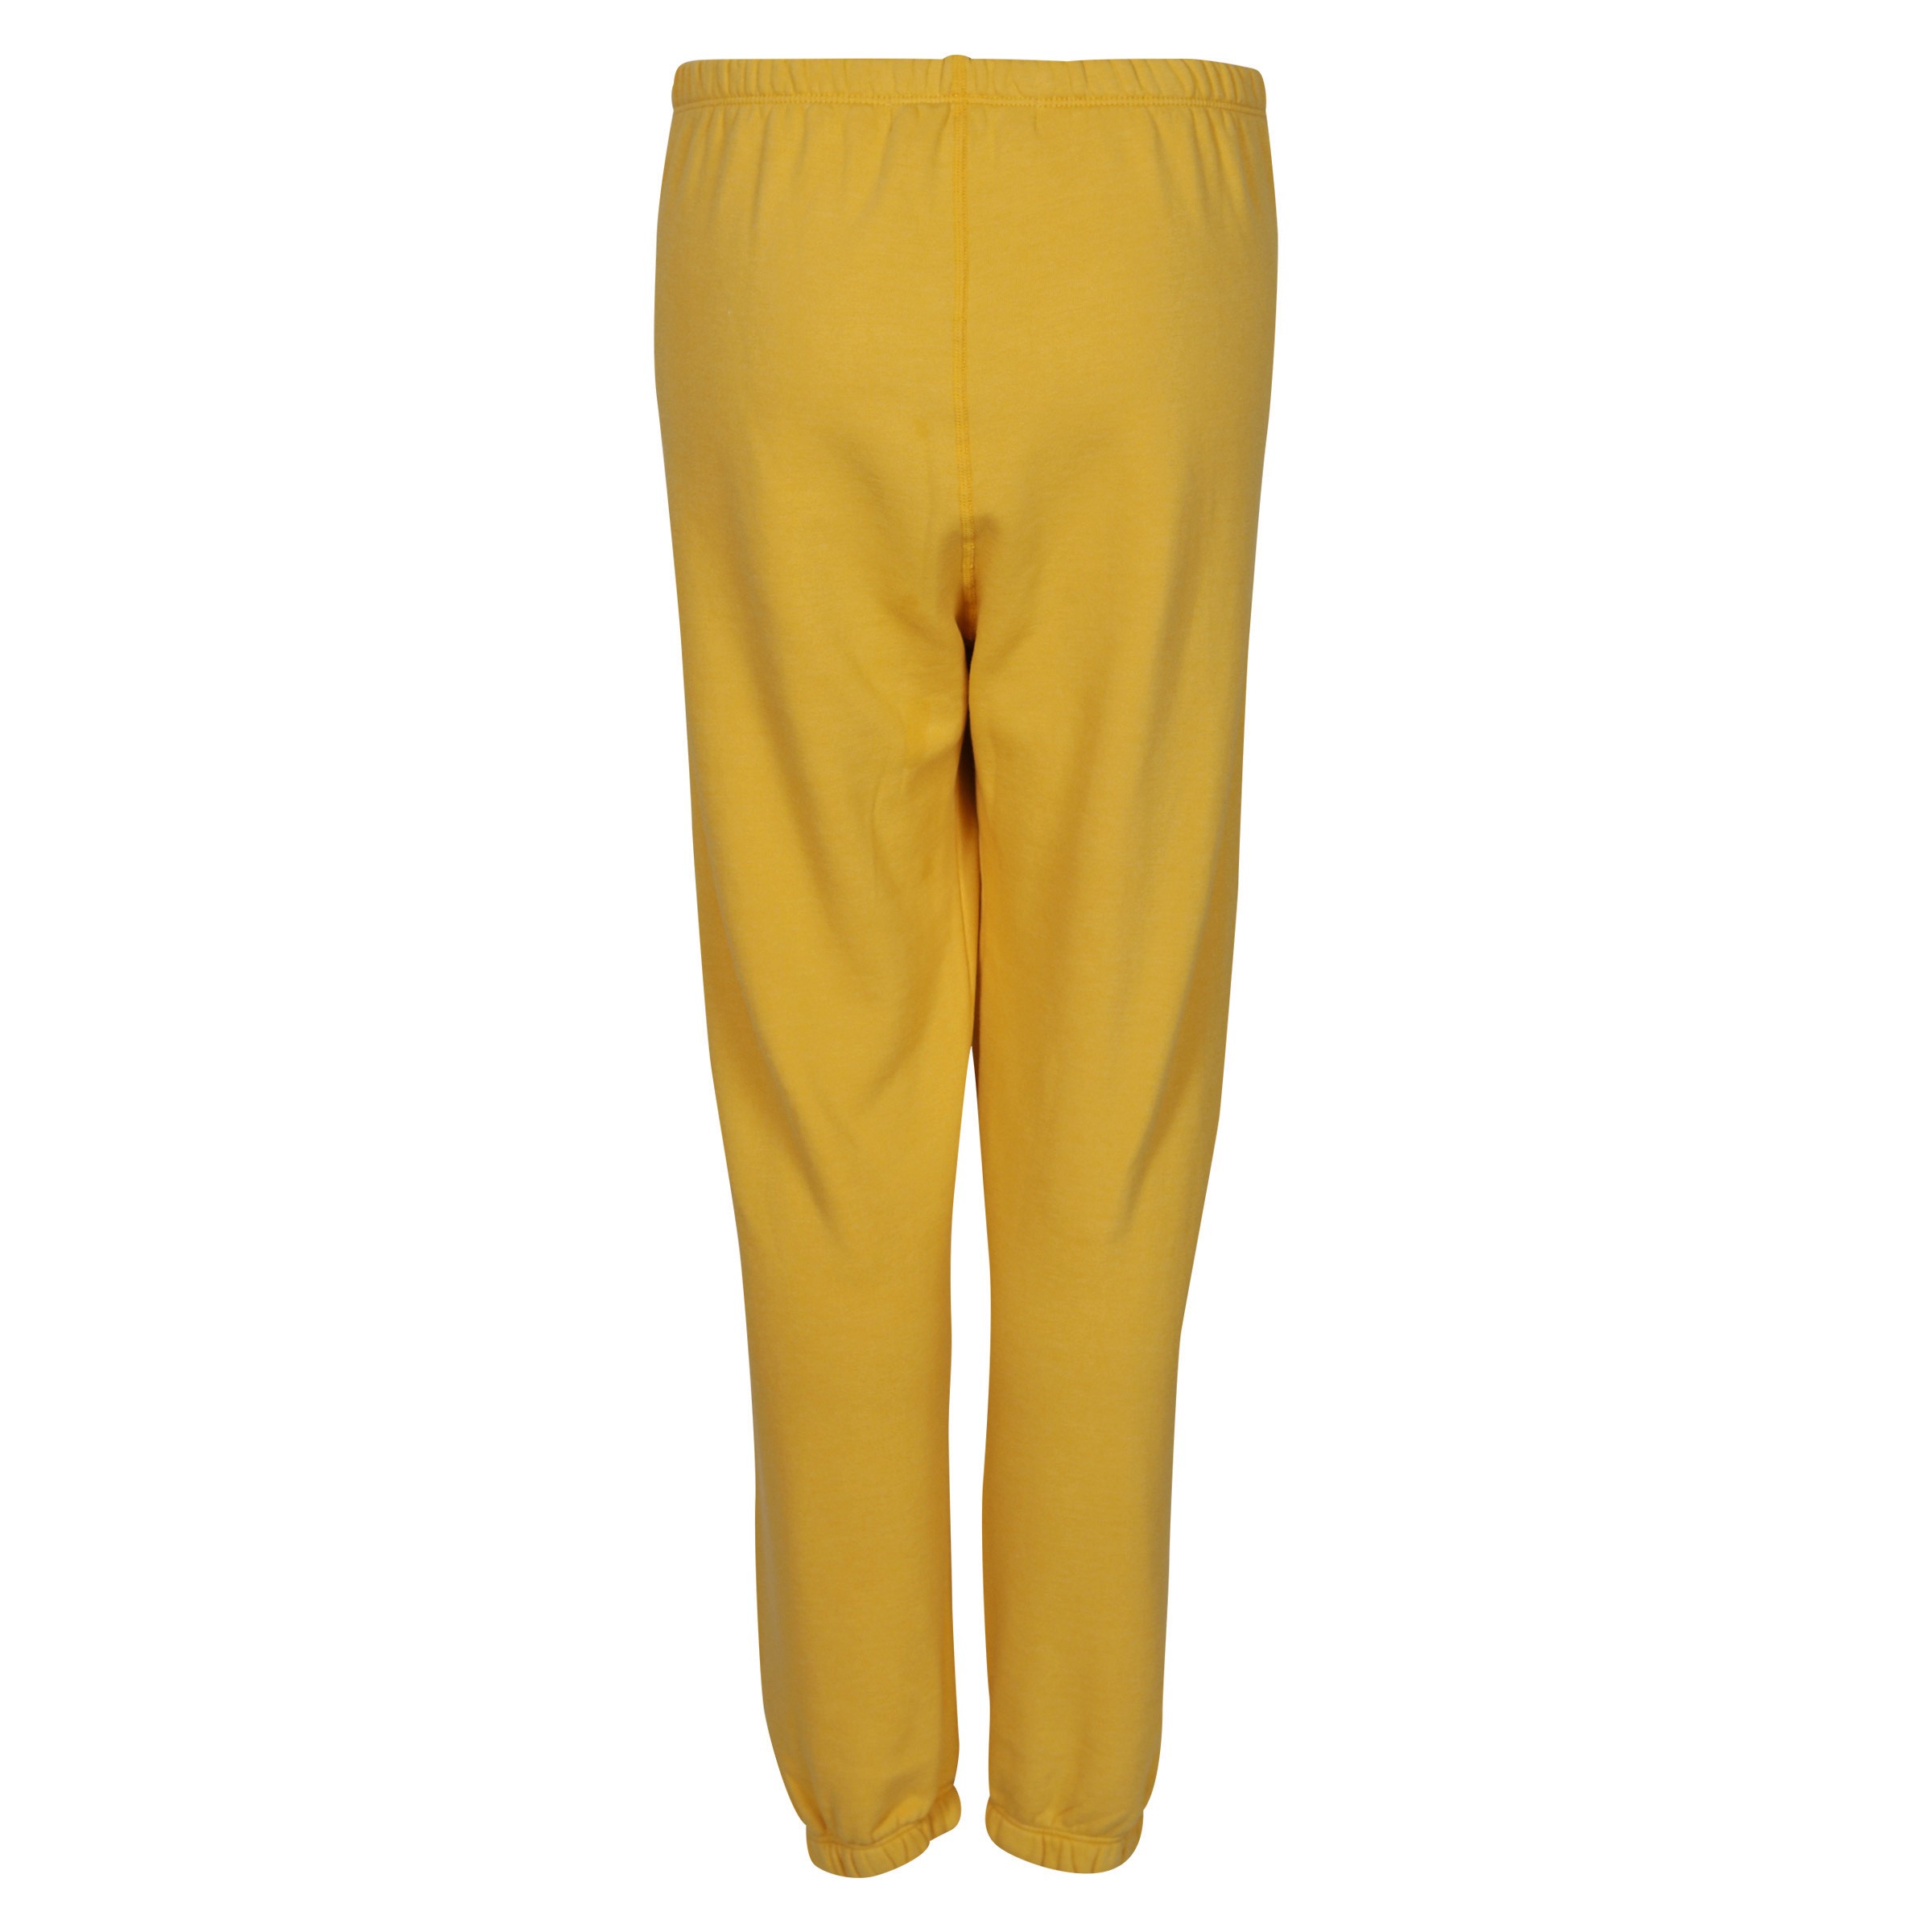 SPRWMN Embroidereed Logo Sweatpant in Dandelion Yellow L